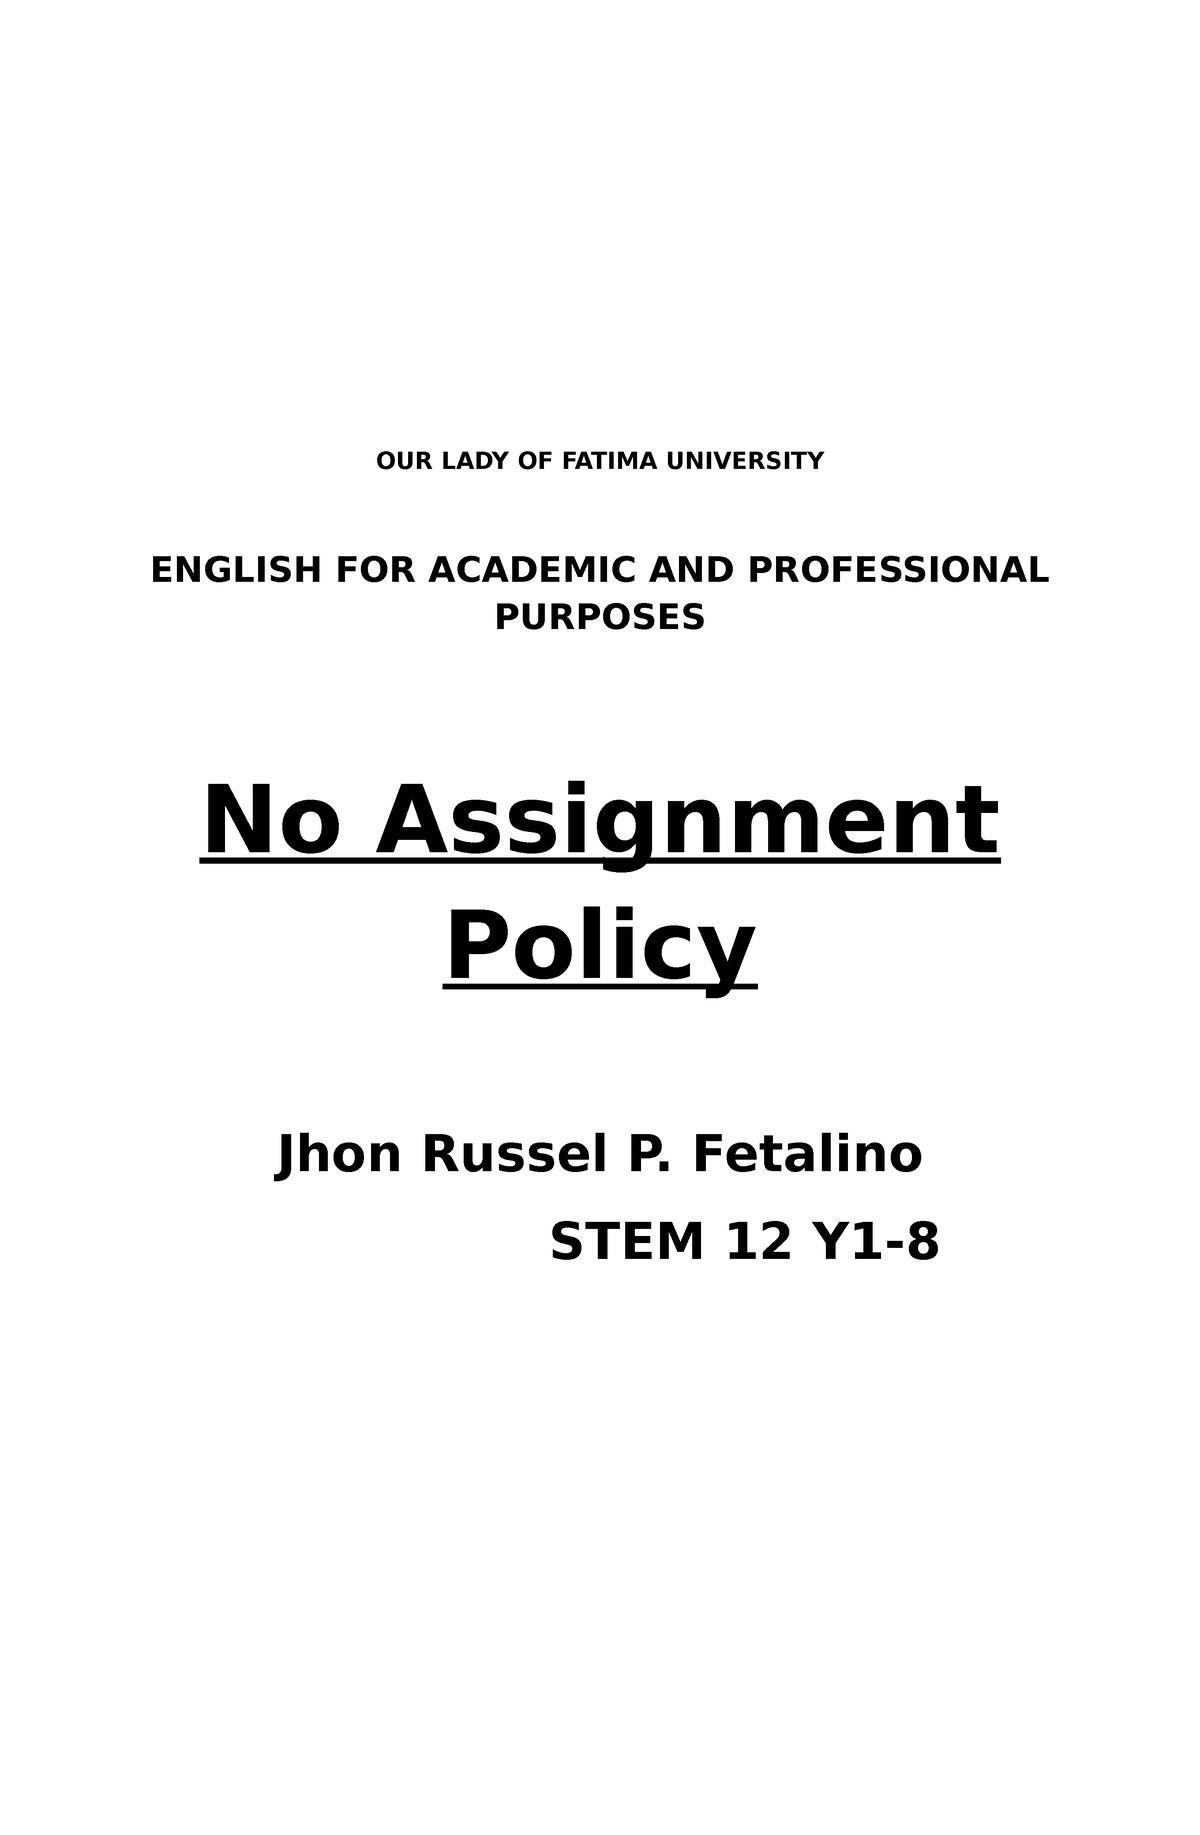 no assignment policy position paper